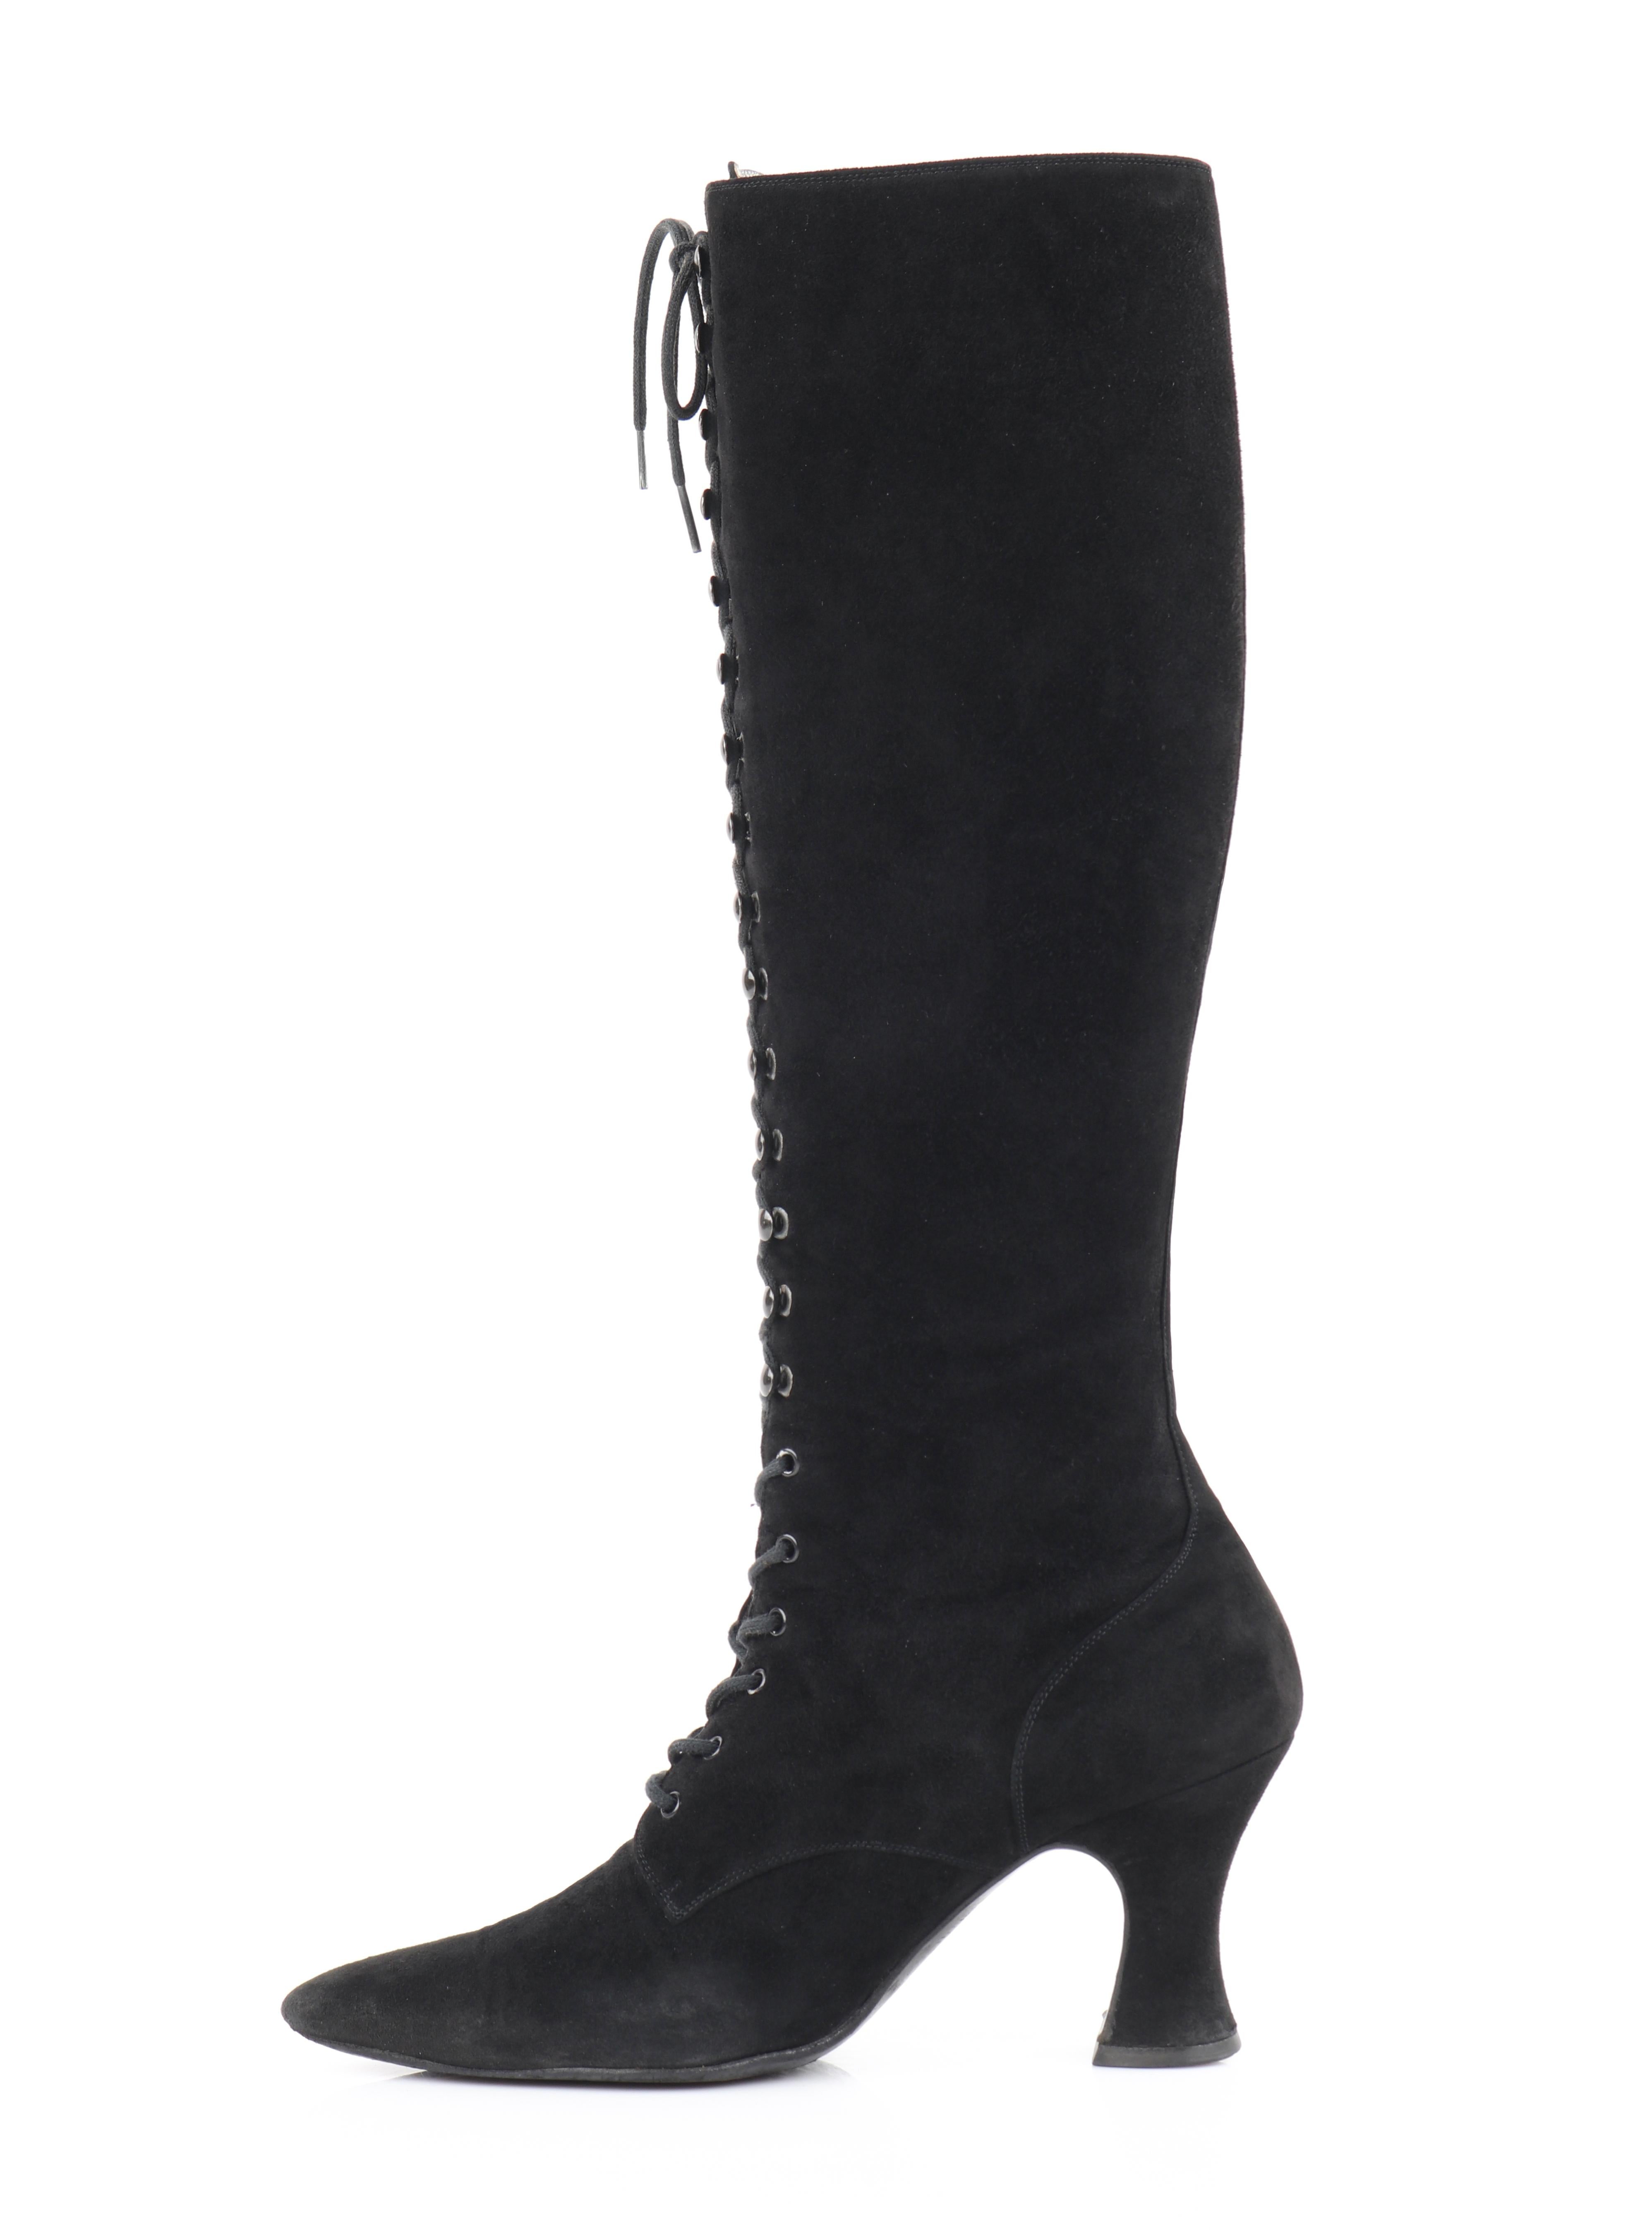 chanel black knee high boots